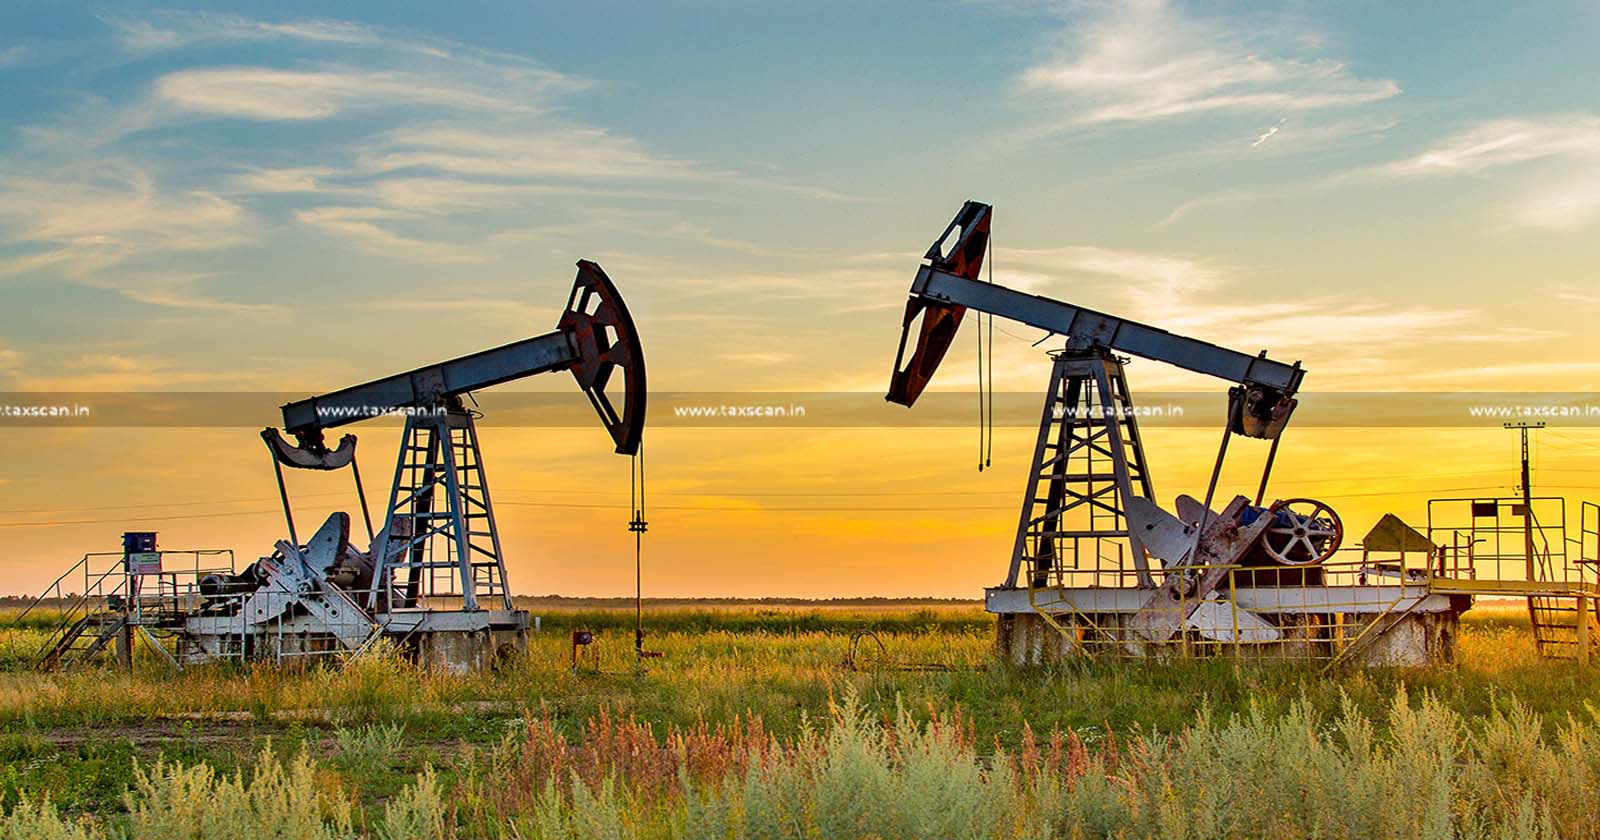 Oil Wells Eligible - Depreciation as Plant and Machinery - ITAT - TAXSCAN